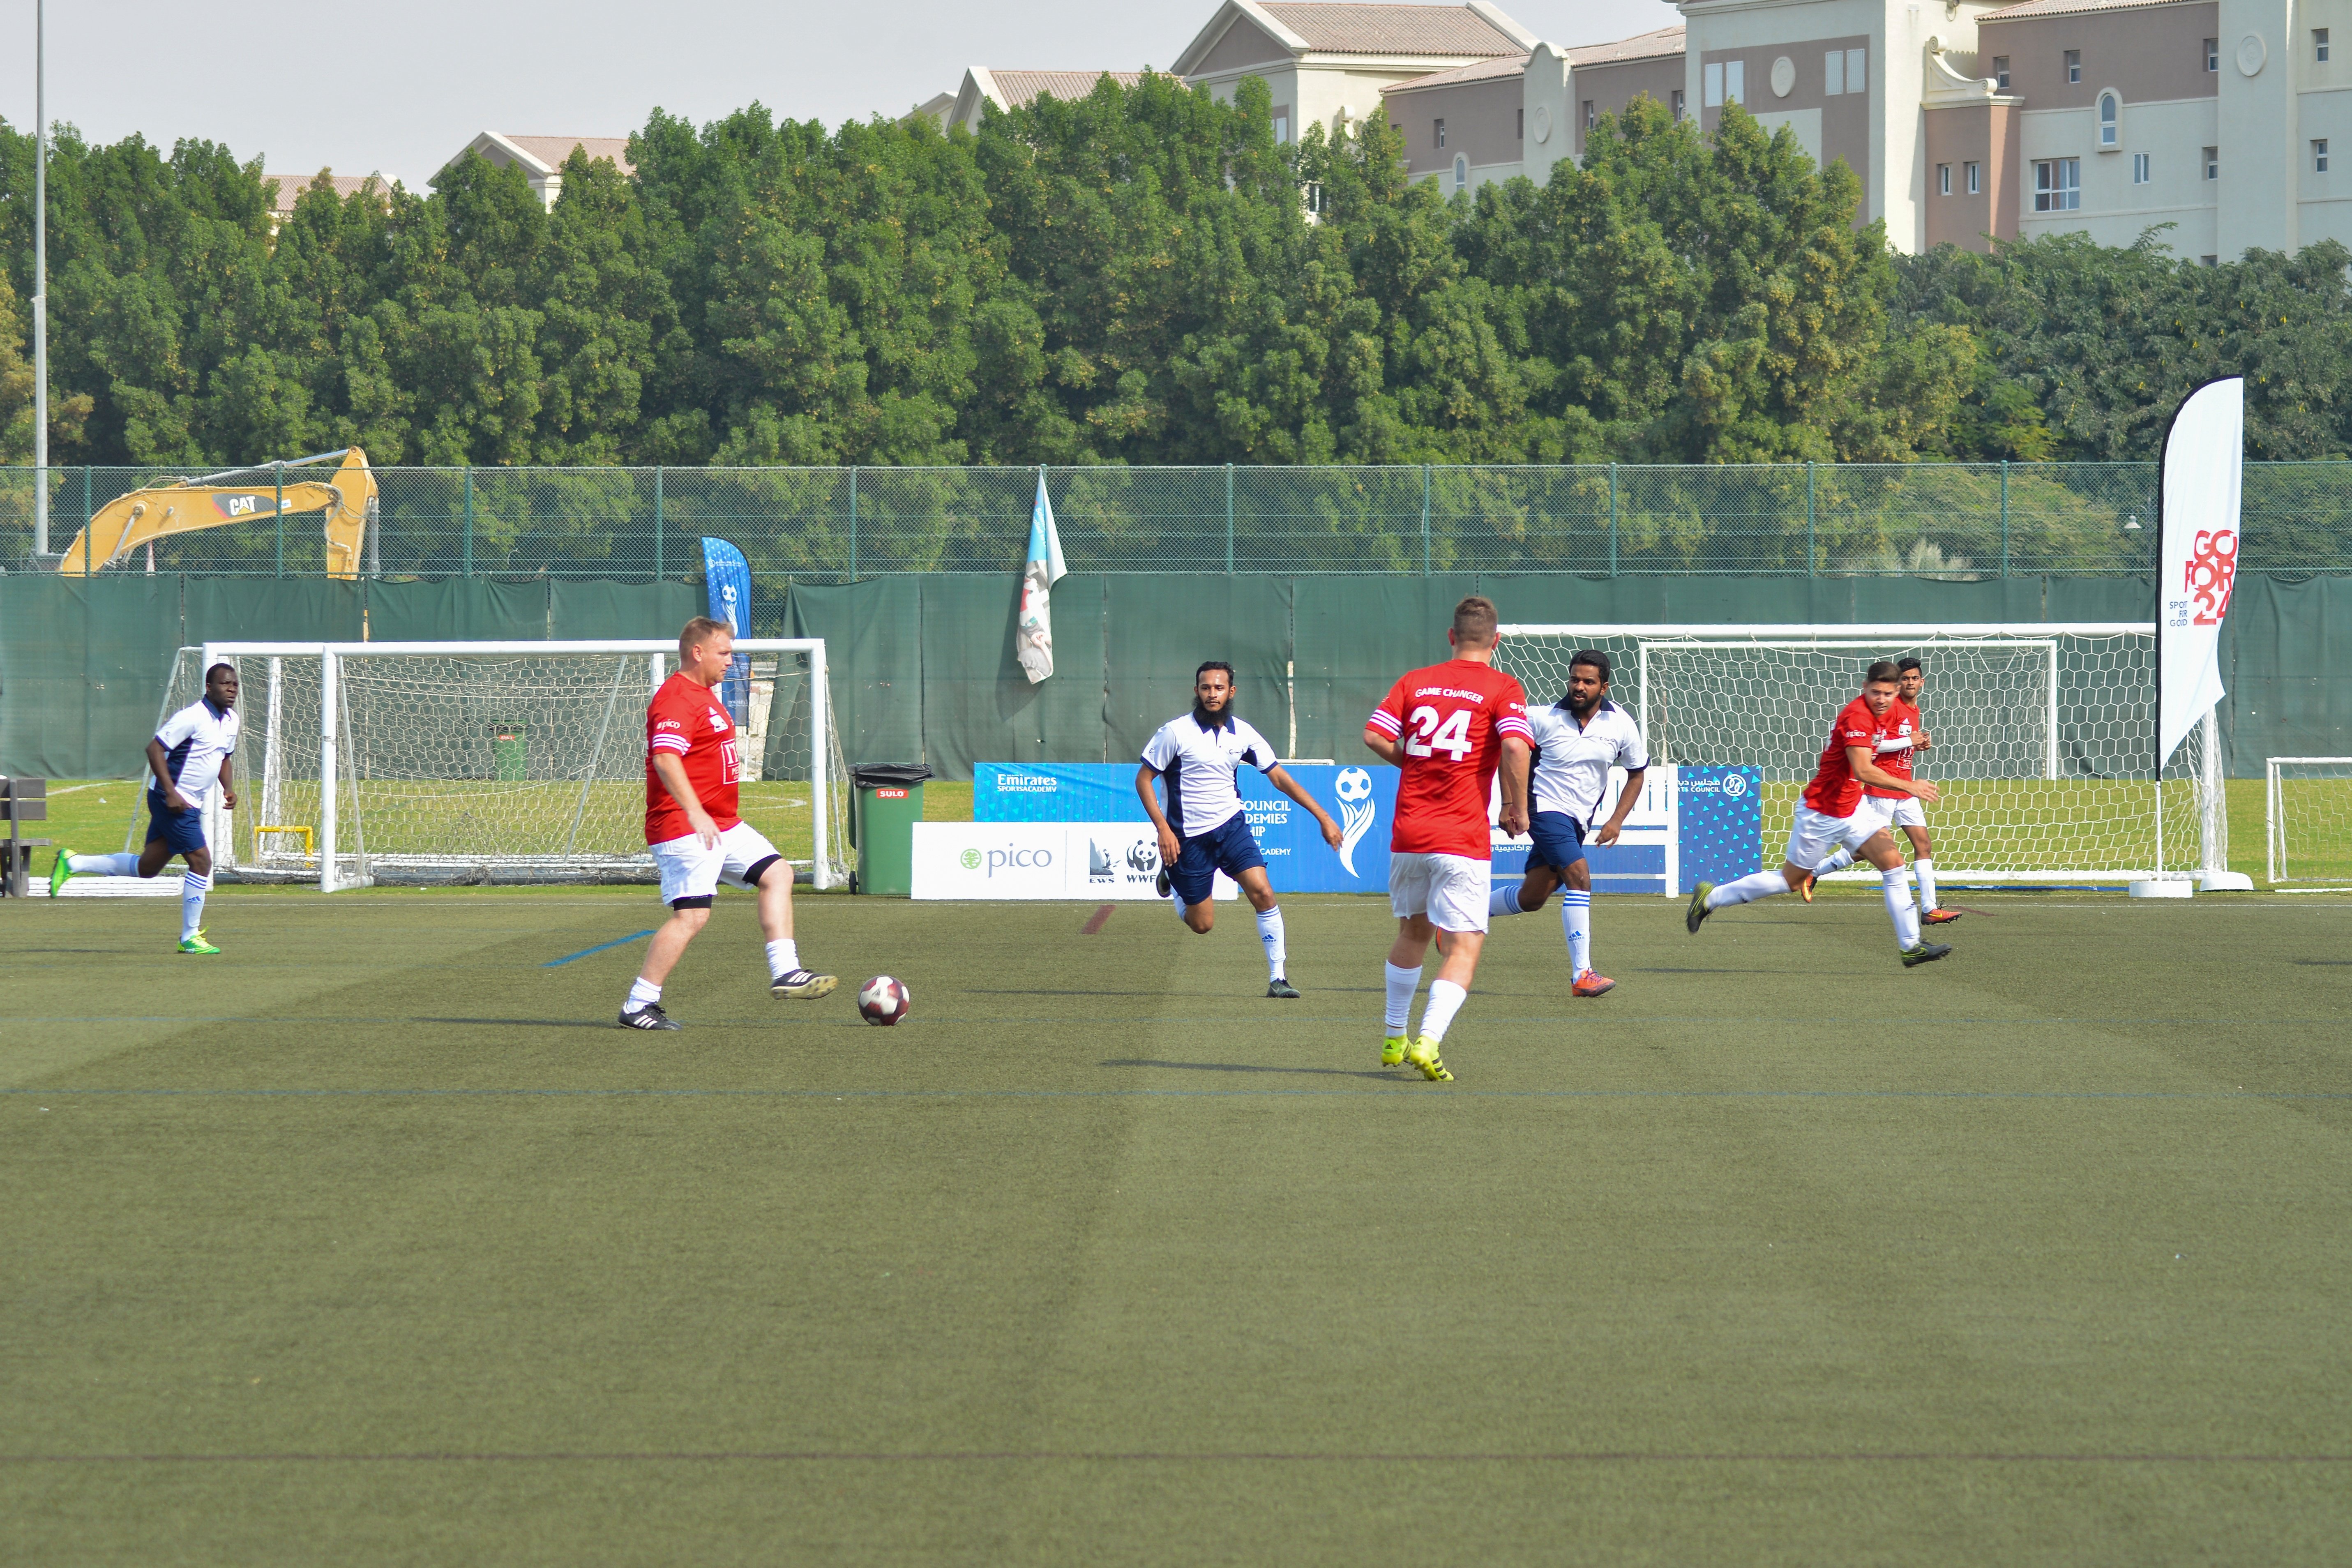 Gulf Craft team vs Heroes at the Oceans 24 Hour Football Challenge